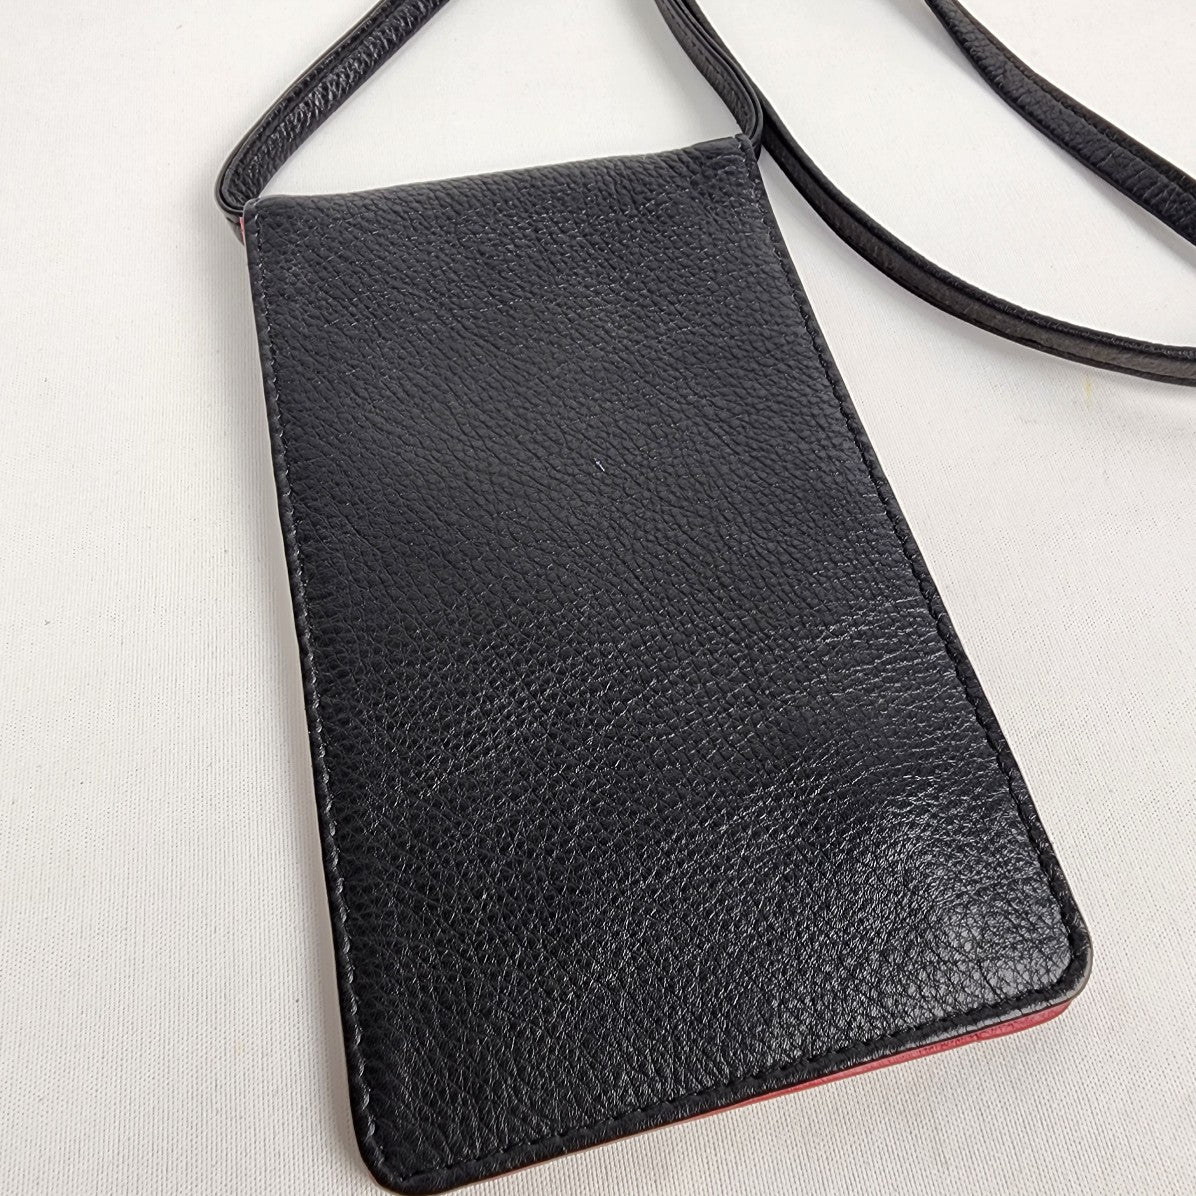 Black & Red Leather RFID Lining Wallet Purse